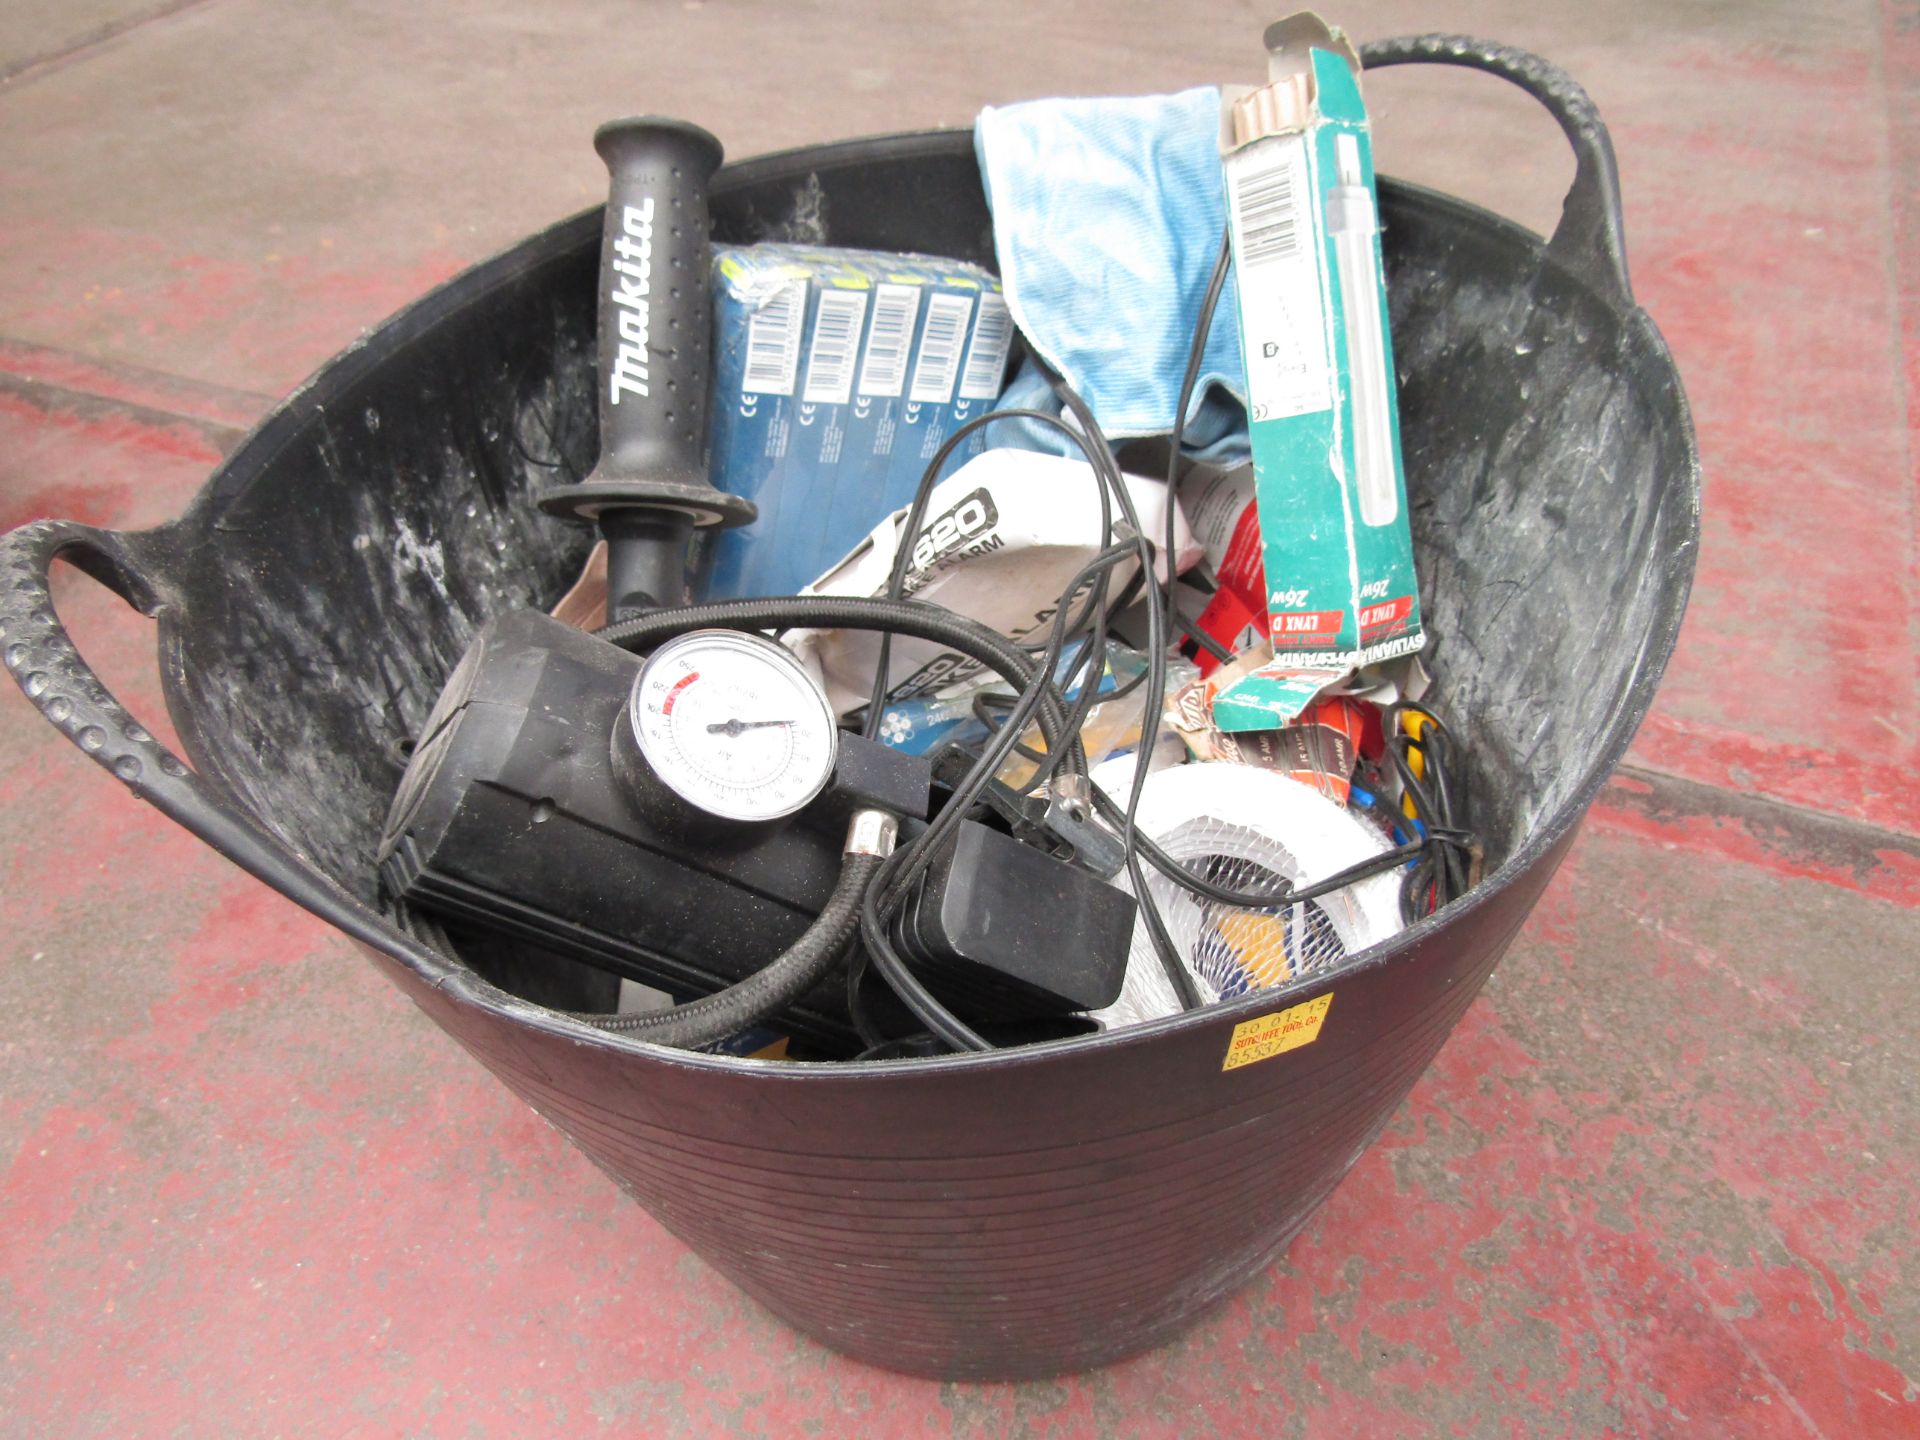 Black tub with various items including Bulbs, 12v Pump and more